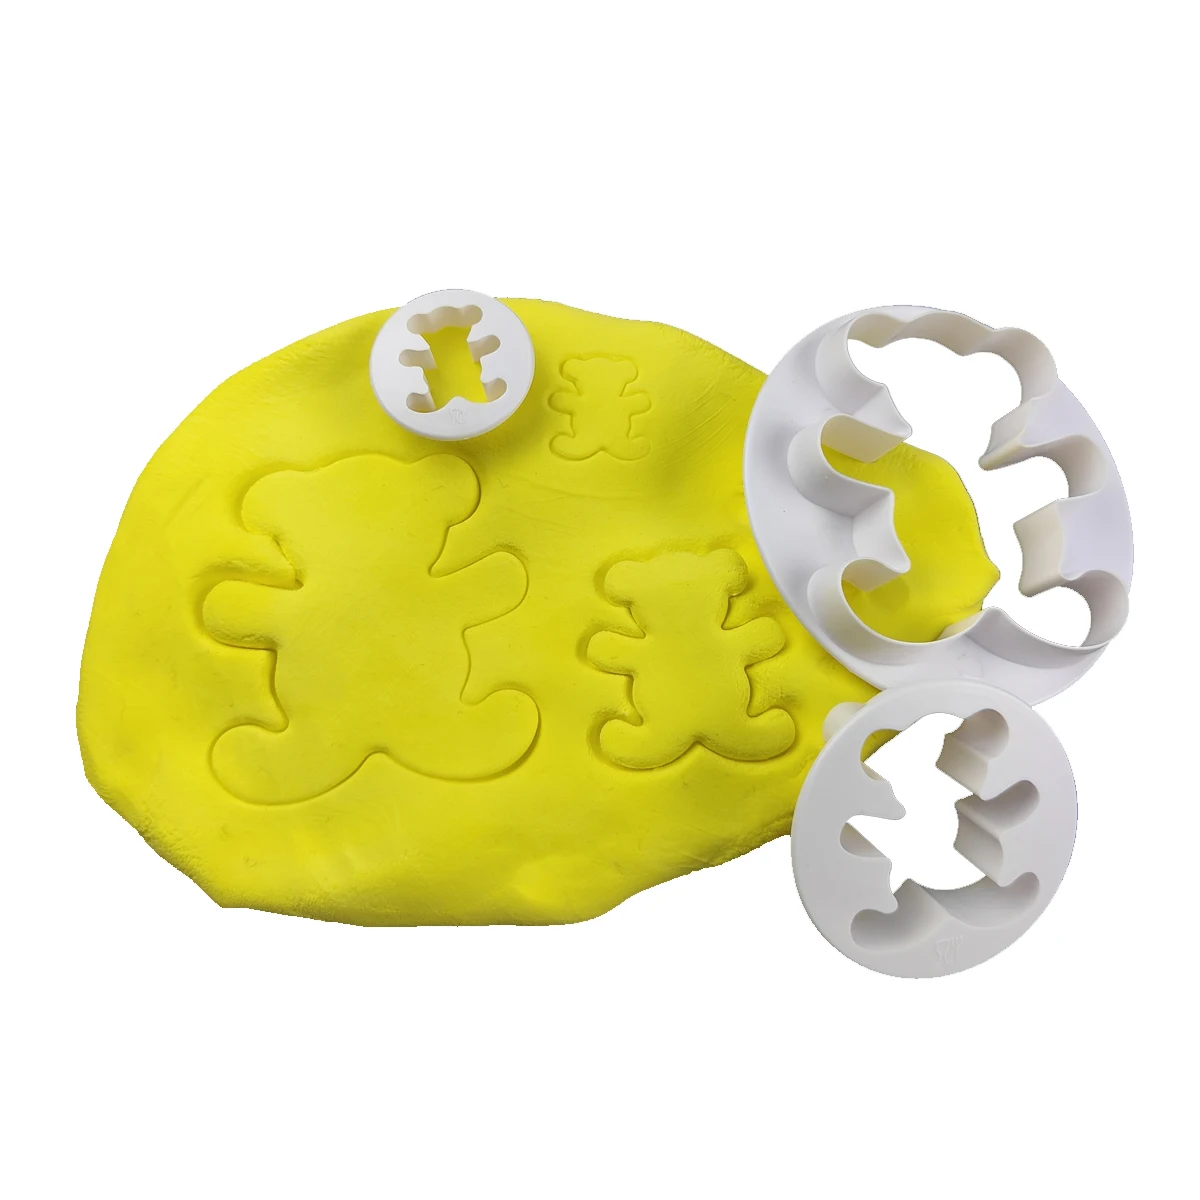 

3Pcs Cookie Stamp Fudge Cutters Biscuit Molds Form 3D Bear Shape Chocolates Cake Birthday Party Kitchen DIY Baking Mould Tools